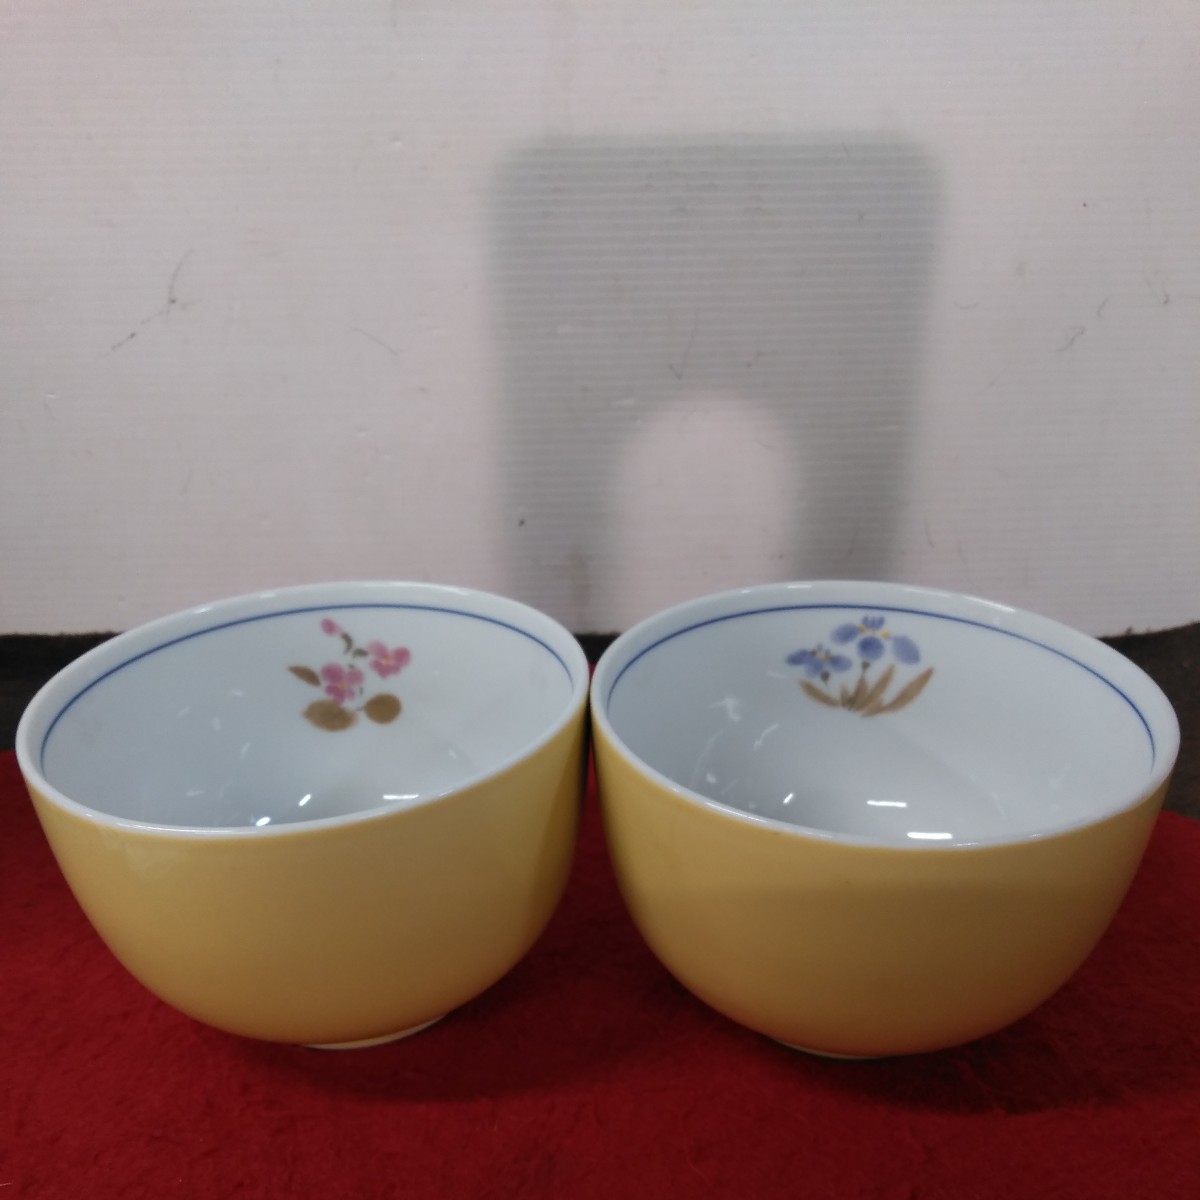 g_t N579 たち吉　花数奇　小どんぶり　2客　まとめ売り♪　和食器_画像1